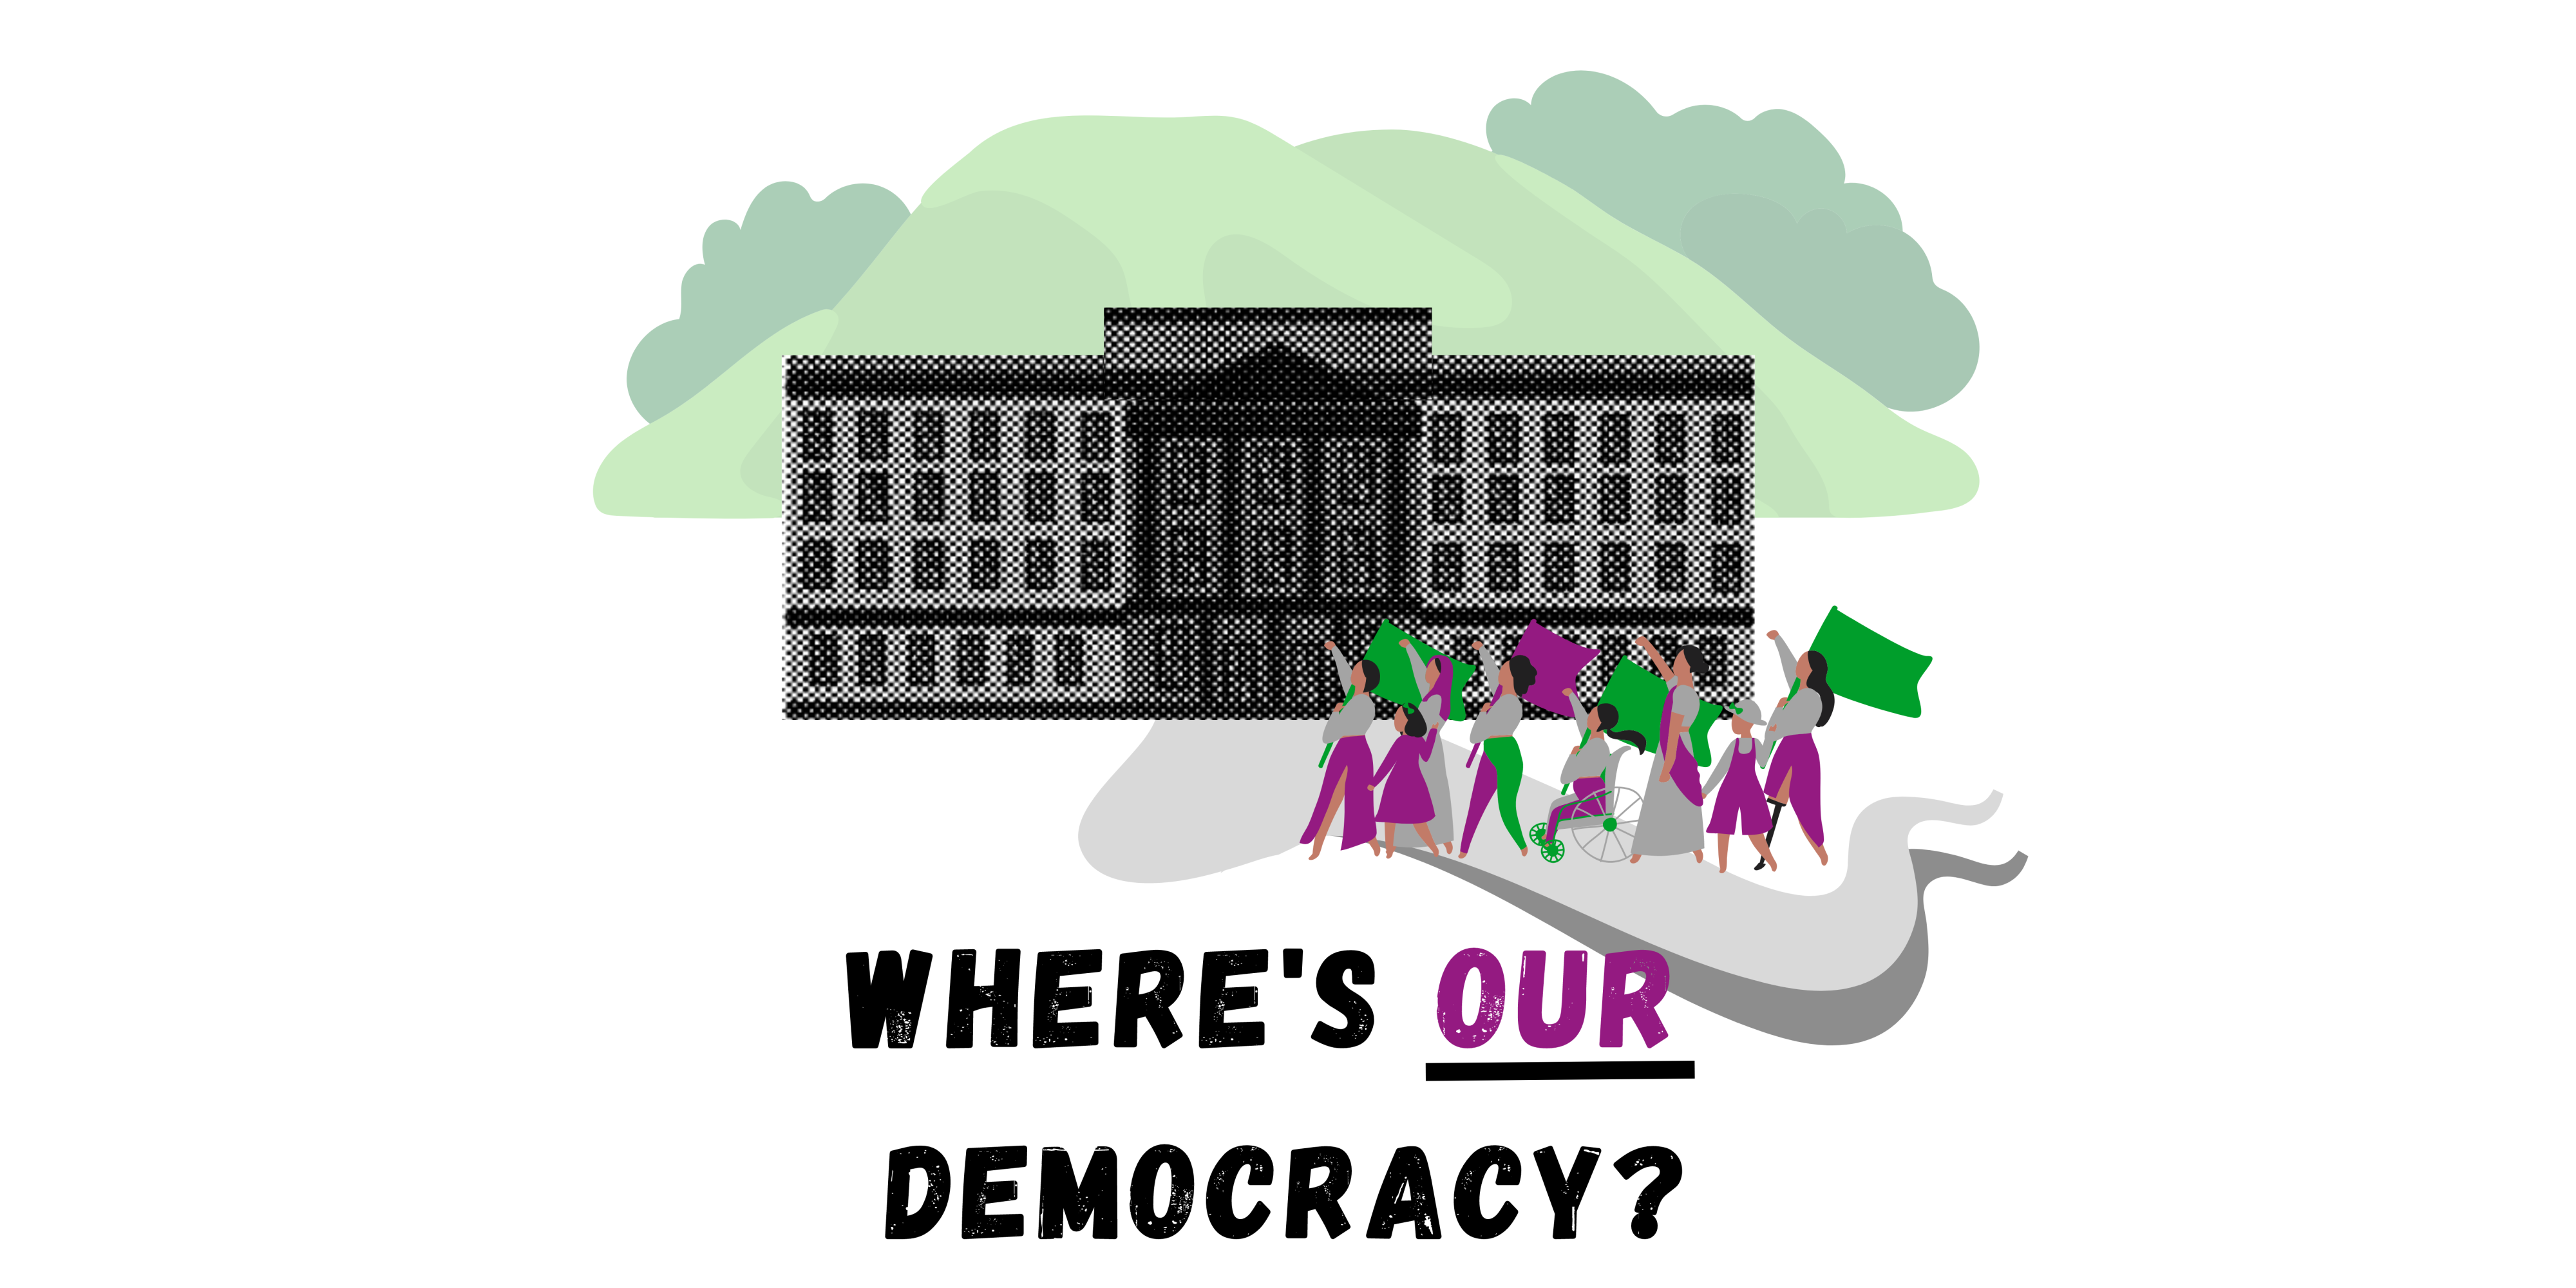 Cartoon of Stormont with women marching towards it holding purple and green flags.